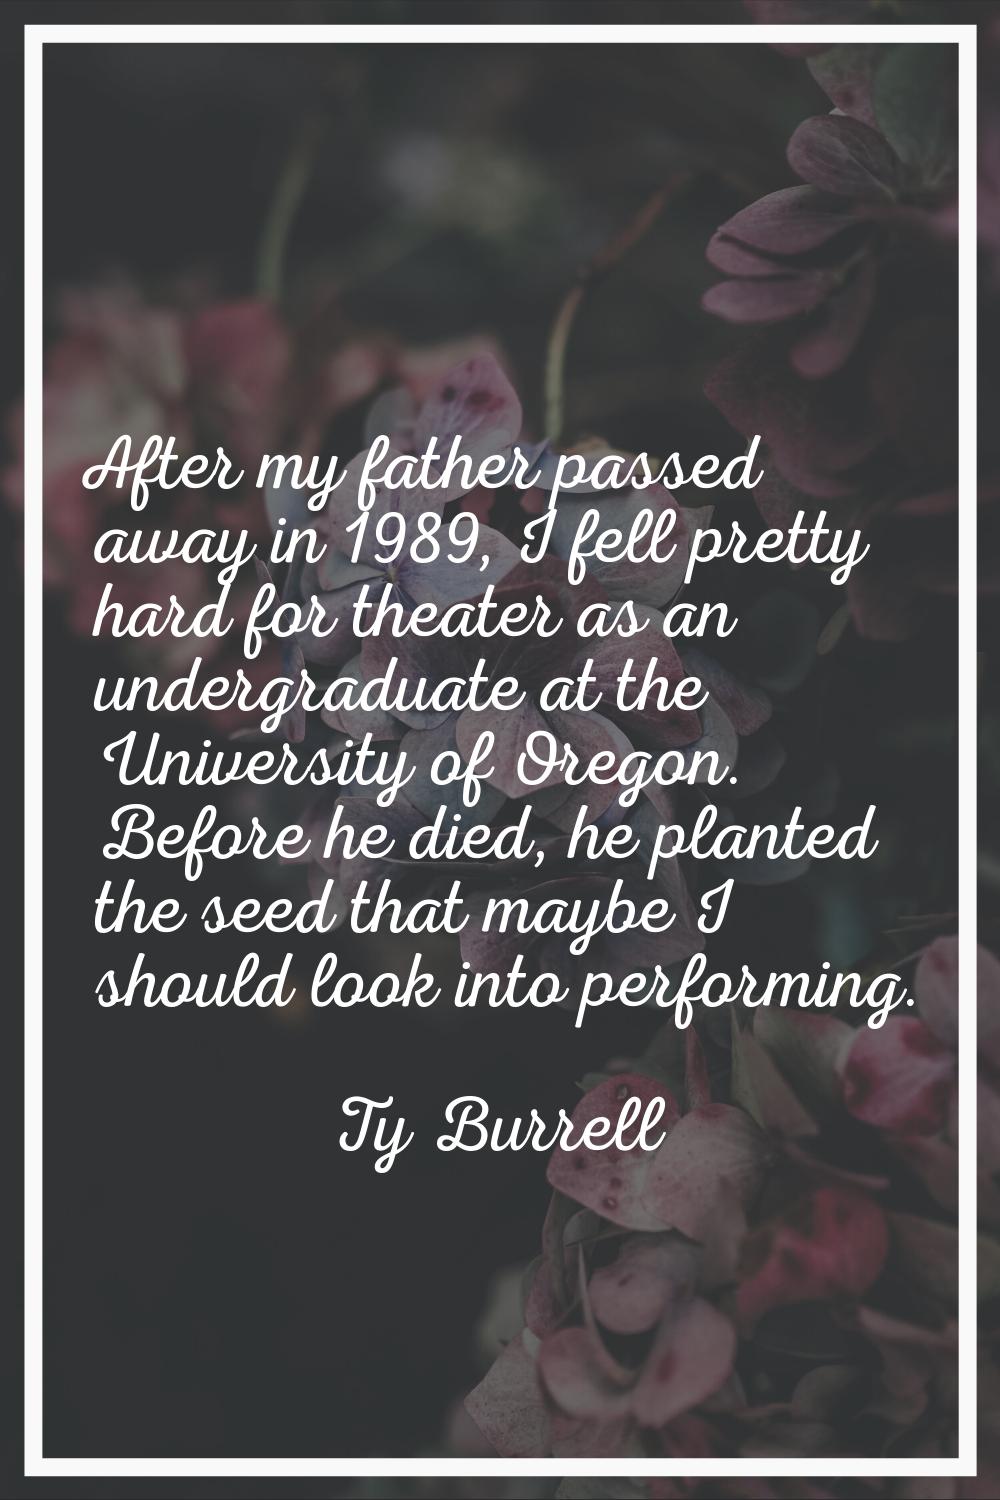 After my father passed away in 1989, I fell pretty hard for theater as an undergraduate at the Univ